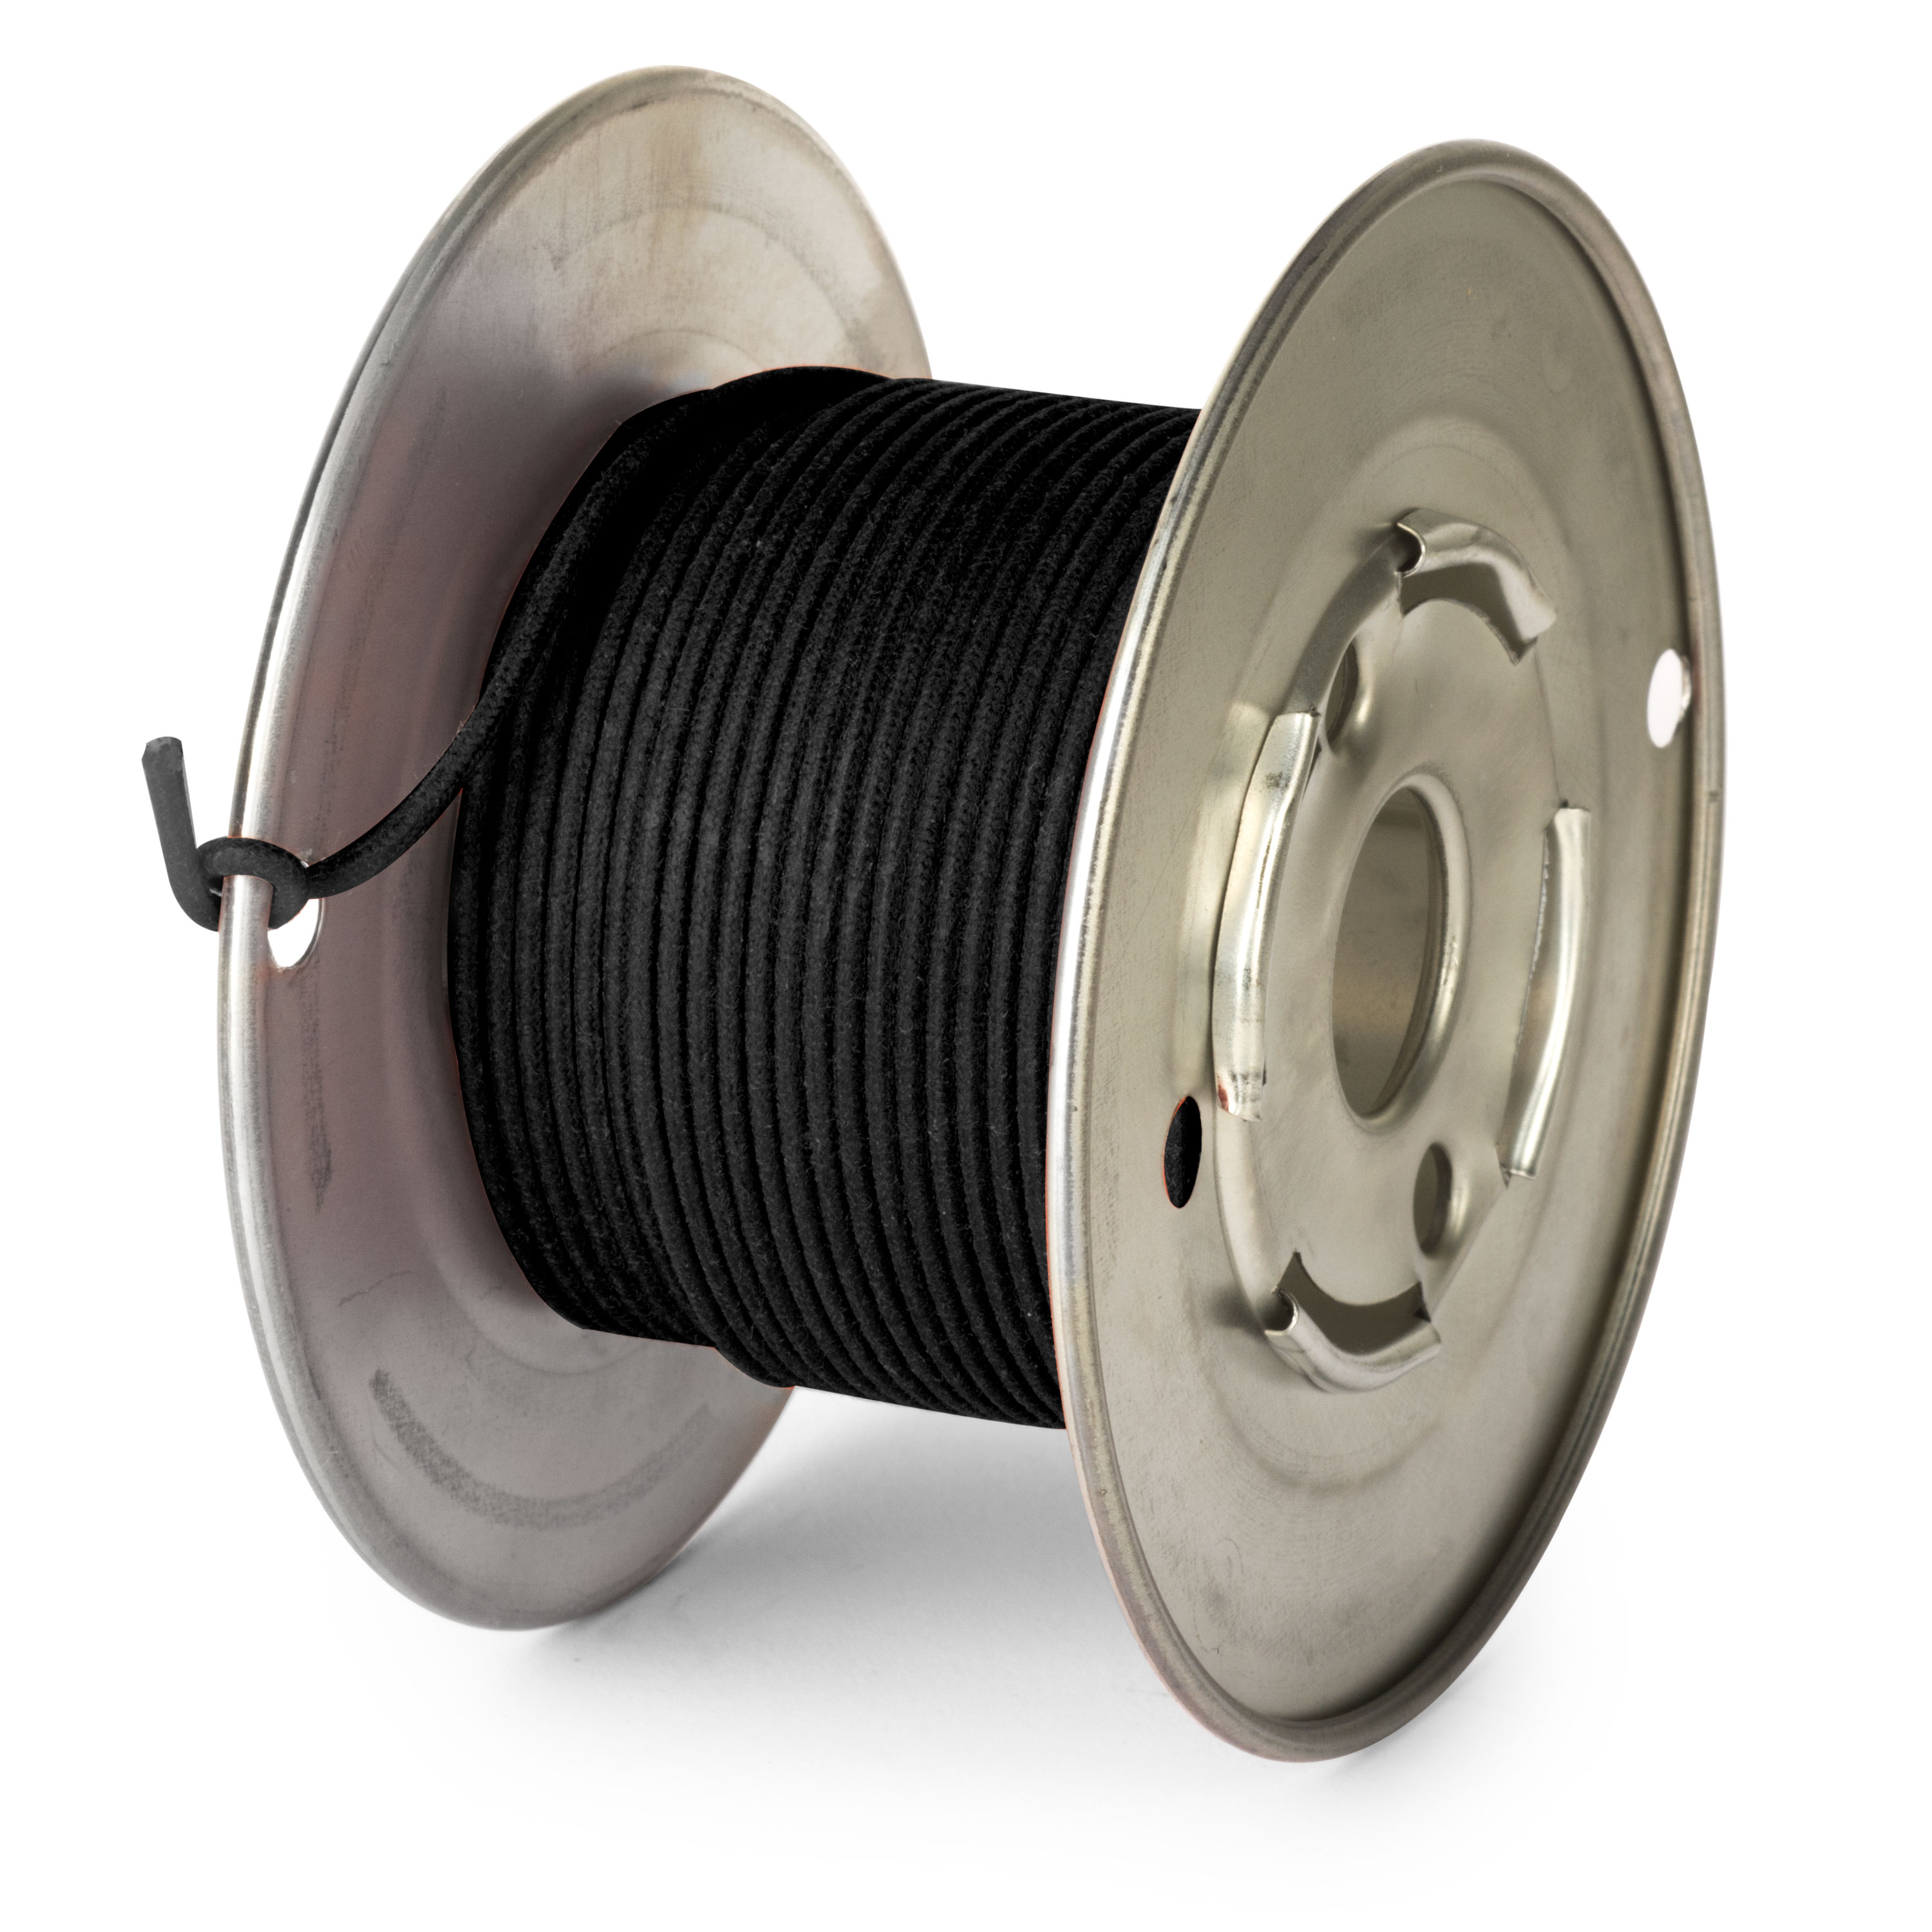 https://www.stewmac.com/globalassets/product-images/m002000/m002800/m002882-vintage-solid-core-push-back-wire---50-feet/variant/1777-1-3000.jpg?hash=637704109740000000